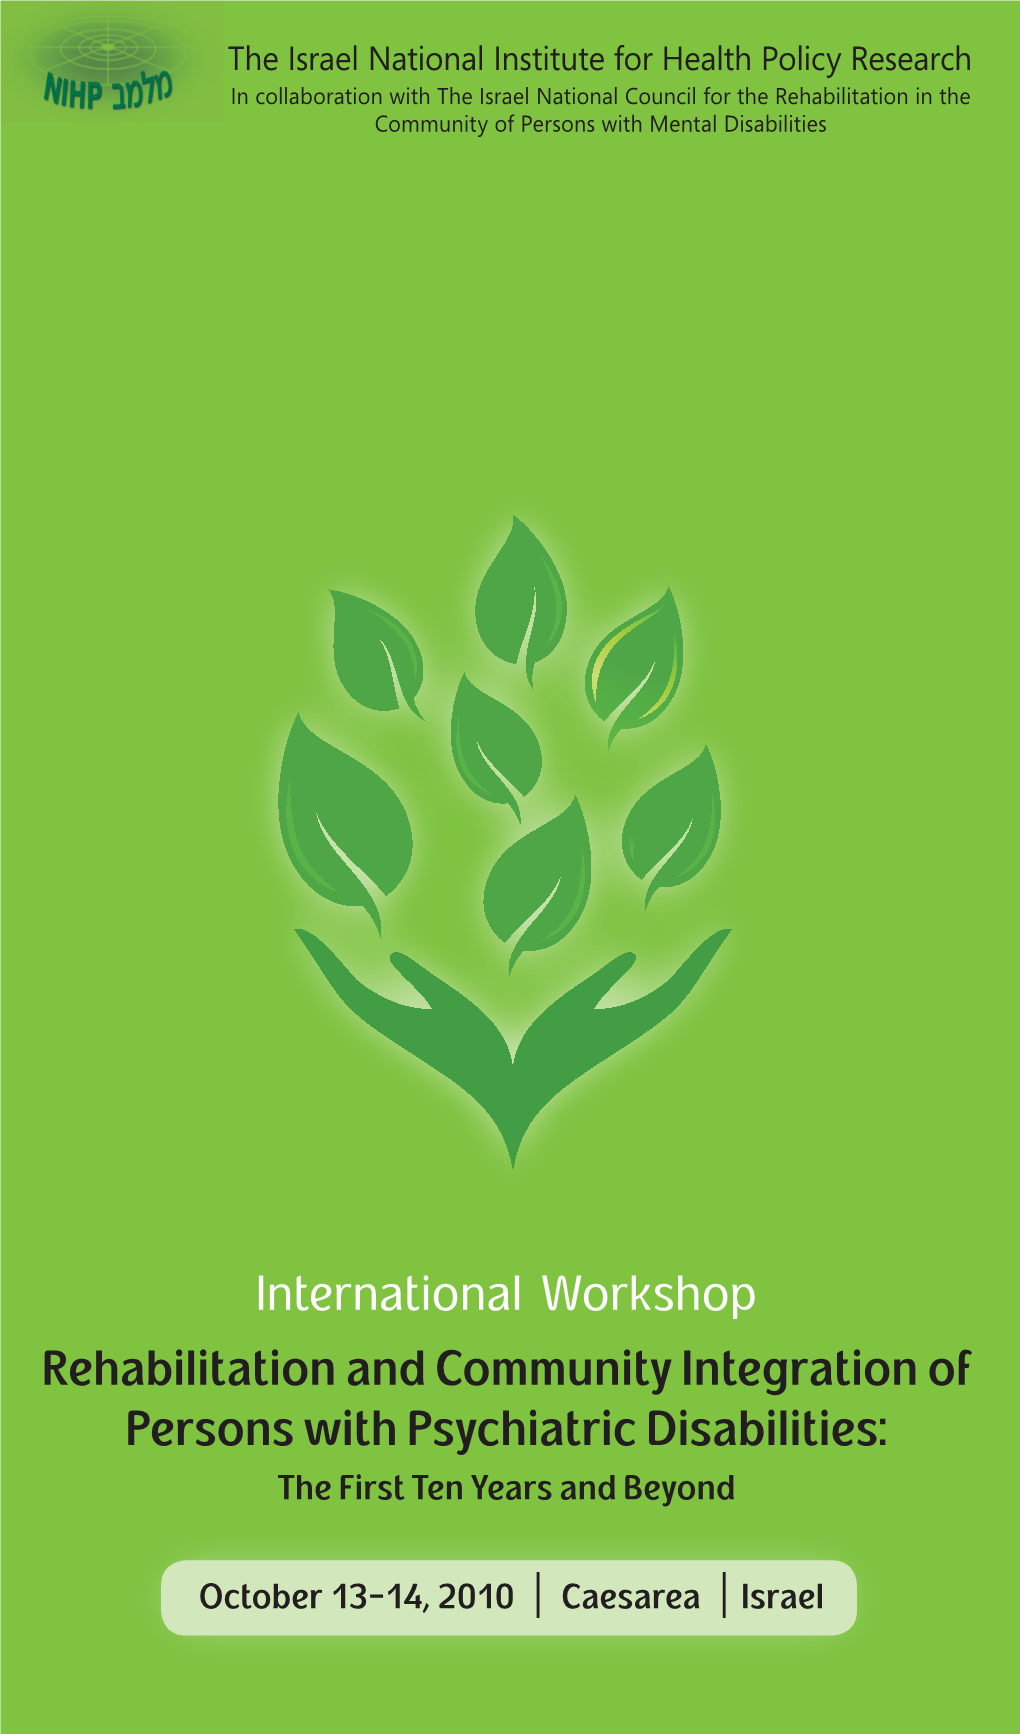 International Workshop Rehabilitation and Community Integration of Persons with Psychiatric Disabilities: the First Ten Years and Beyond